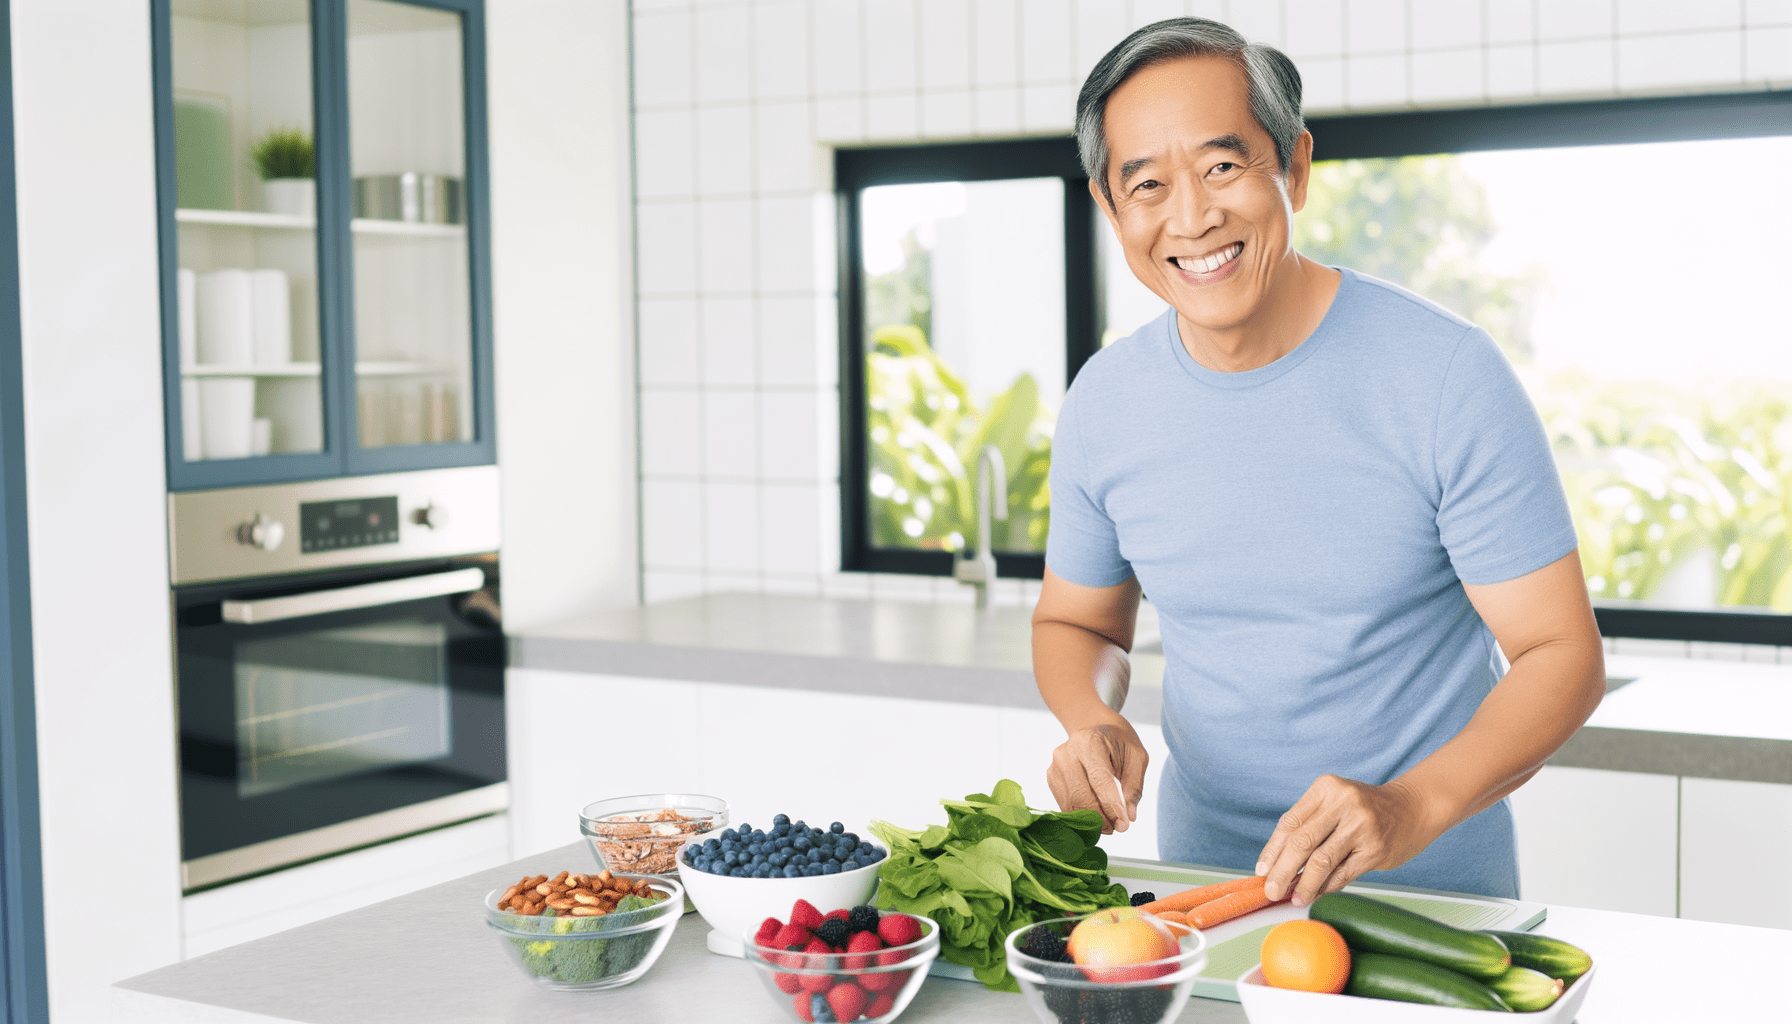 The Senior’s Guide to Natural Anti-Inflammatory Foods